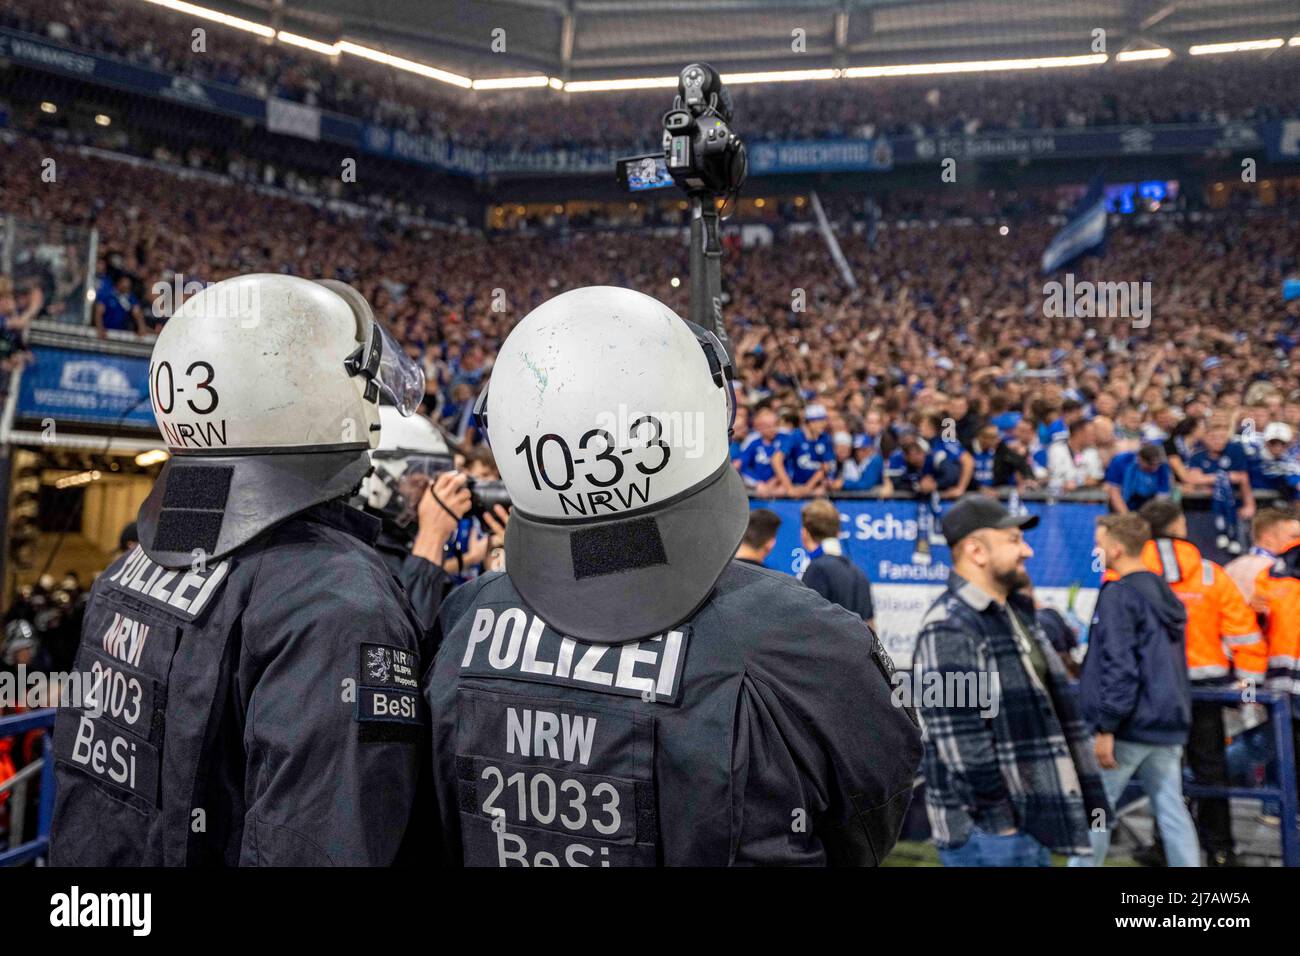 07 May 2022, North Rhine-Westphalia, Gelsenkirchen: Soccer: 2. Bundesliga, FC Schalke 04 - FC St. Pauli, 33rd matchday, Veltins Arena: Police officers film the fans storming the pitch. Photo: David Inderlied/dpa - IMPORTANT NOTE: In accordance with the requirements of the DFL Deutsche Fußball Liga and the DFB Deutscher Fußball-Bund, it is prohibited to use or have used photographs taken in the stadium and/or of the match in the form of sequence pictures and/or video-like photo series. Stock Photo